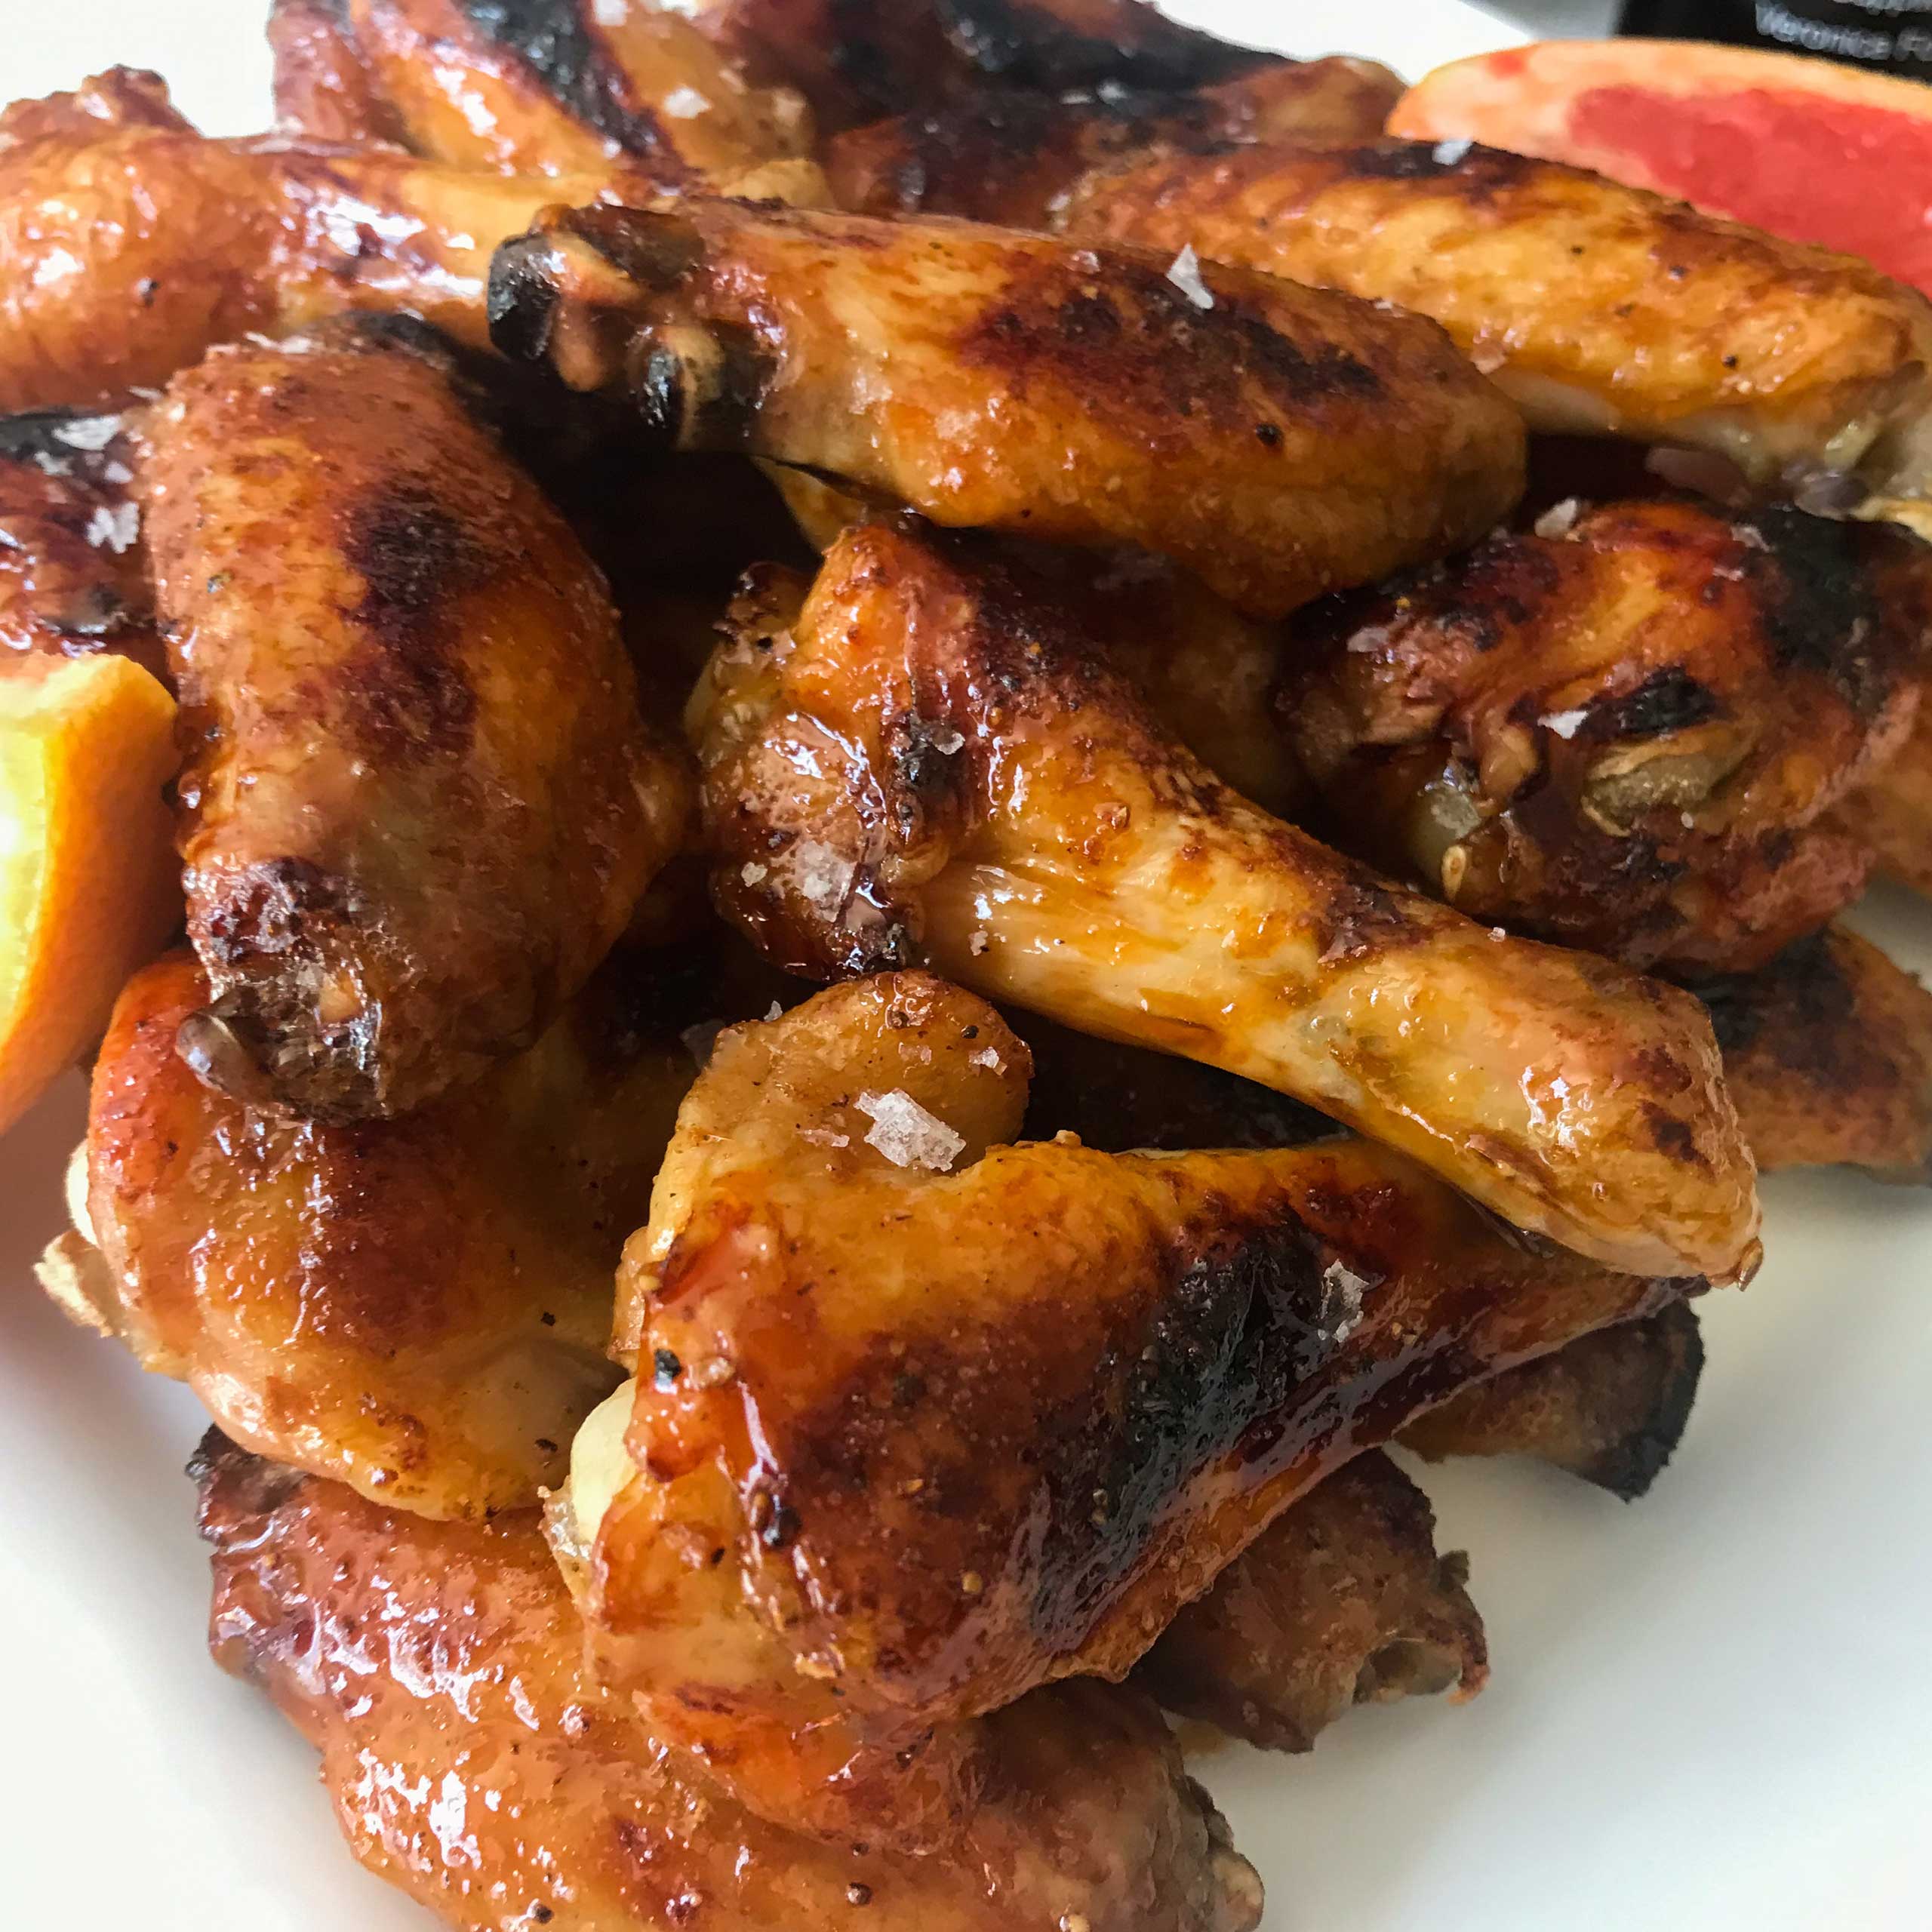 Baked-Grapefruit-and-Garlic-Glazed-Chicken-Wings-11